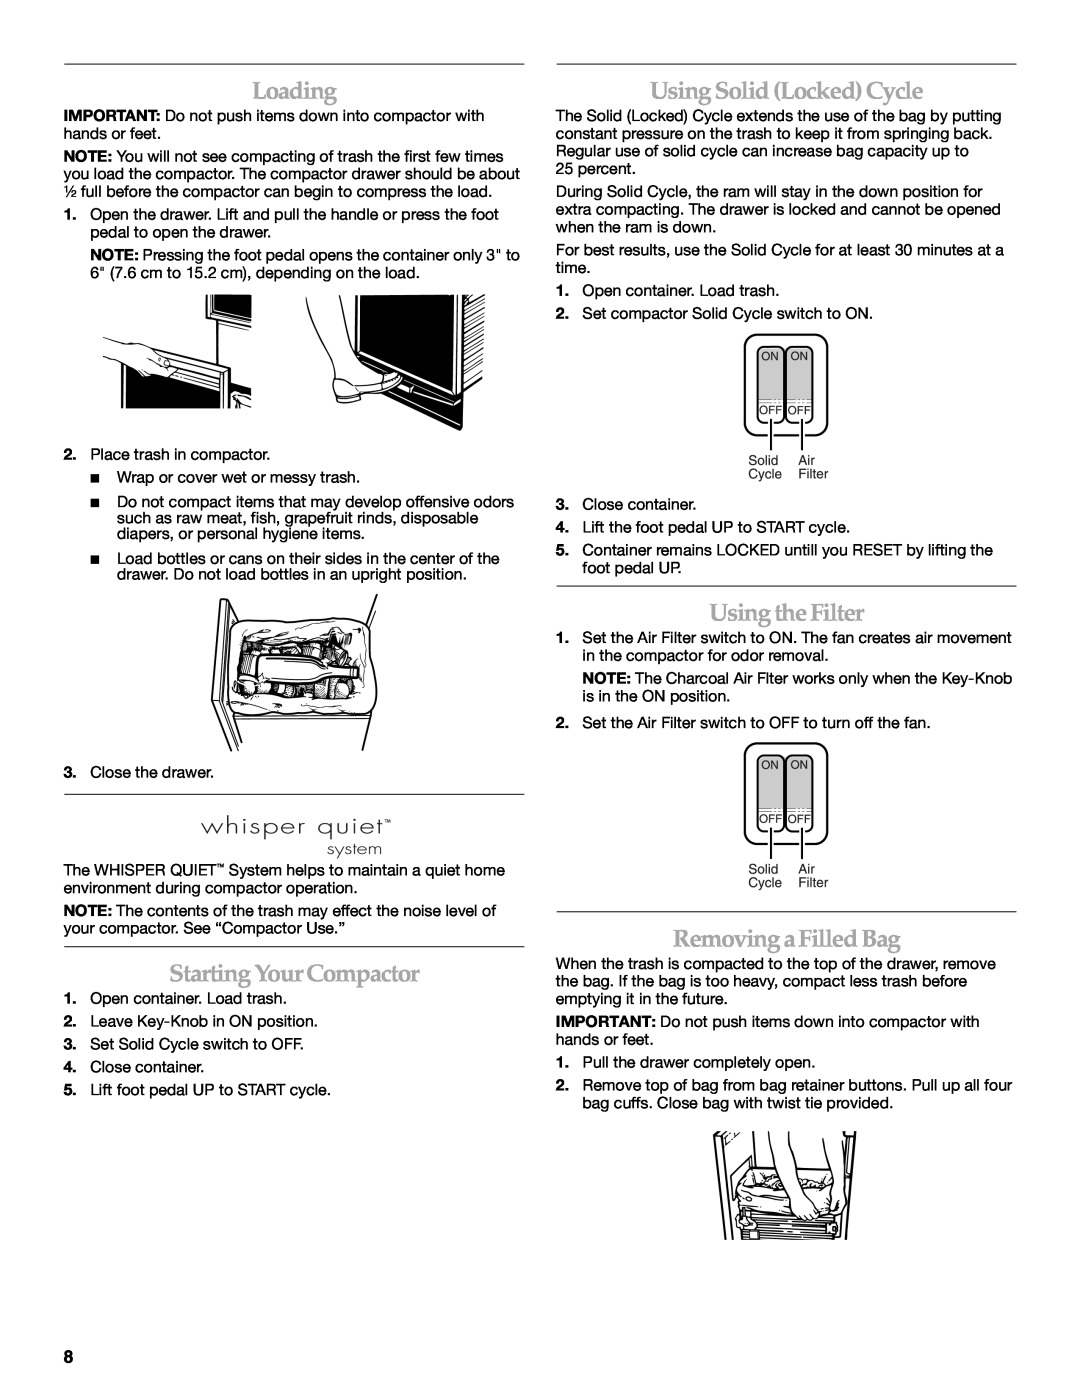 KitchenAid 9871915A Loading, Starting Your Compactor, Using Solid Locked Cycle, Using the Filter, Removinga Filled Bag 